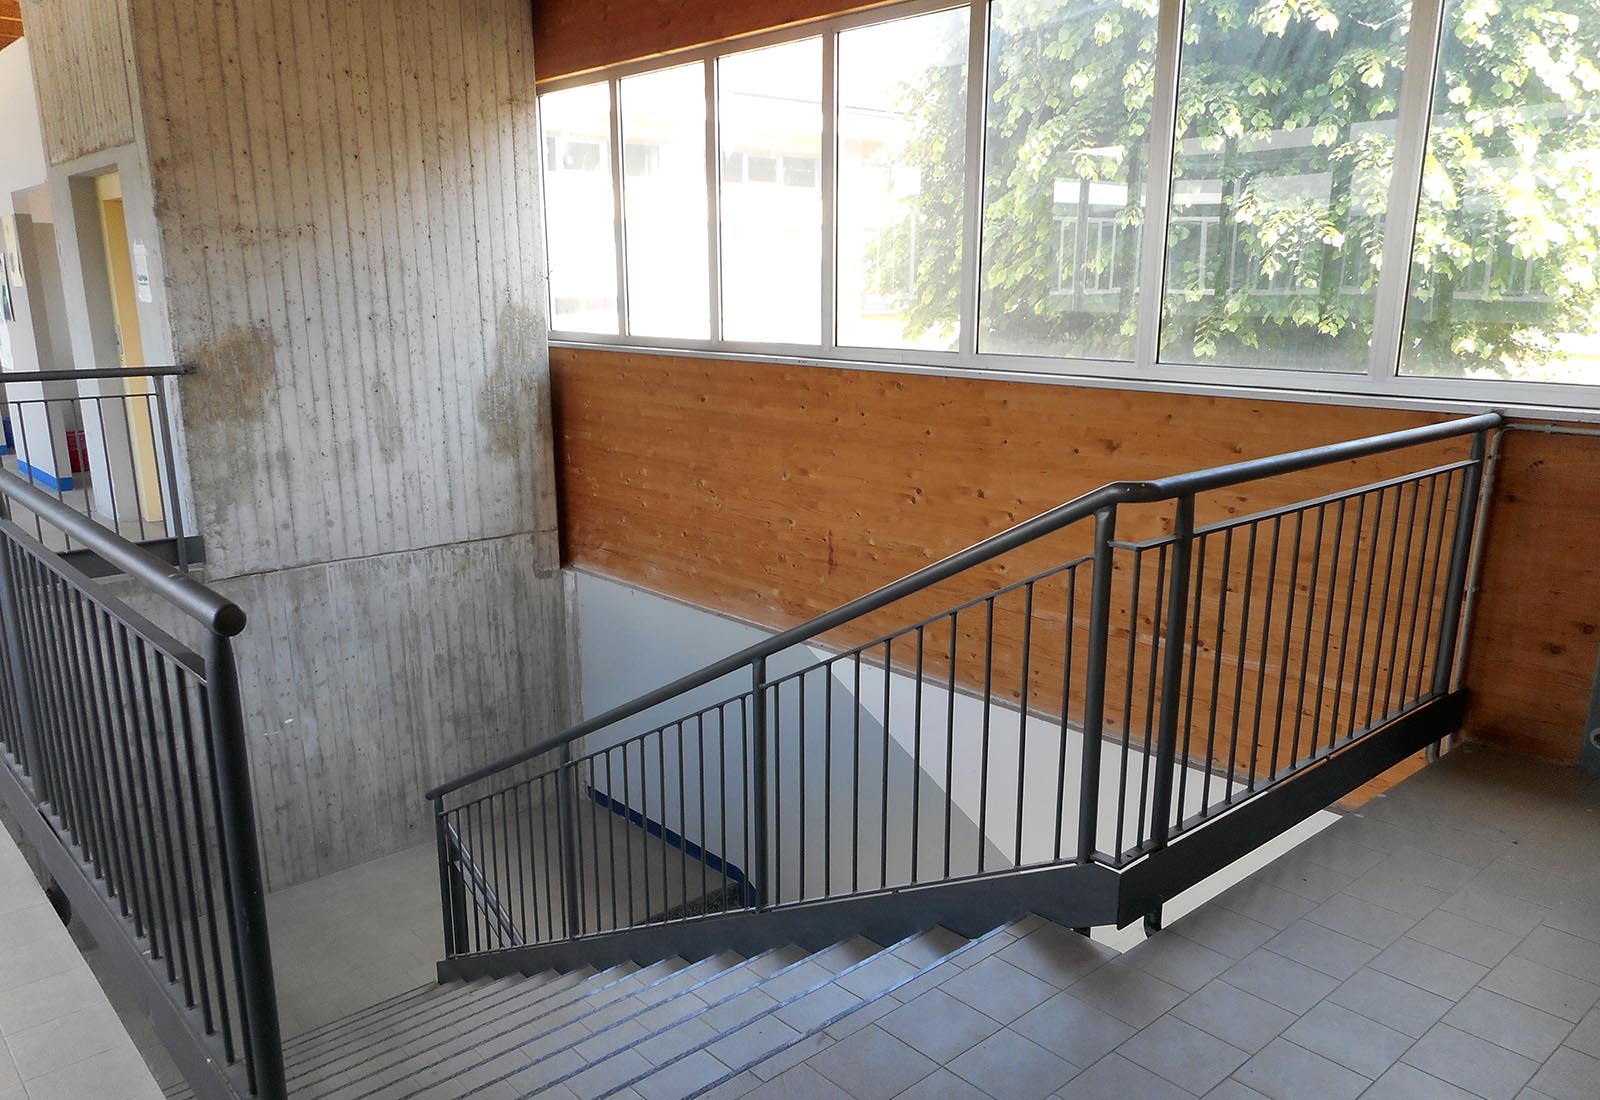 High school renovation in Melegnano - The new staircase